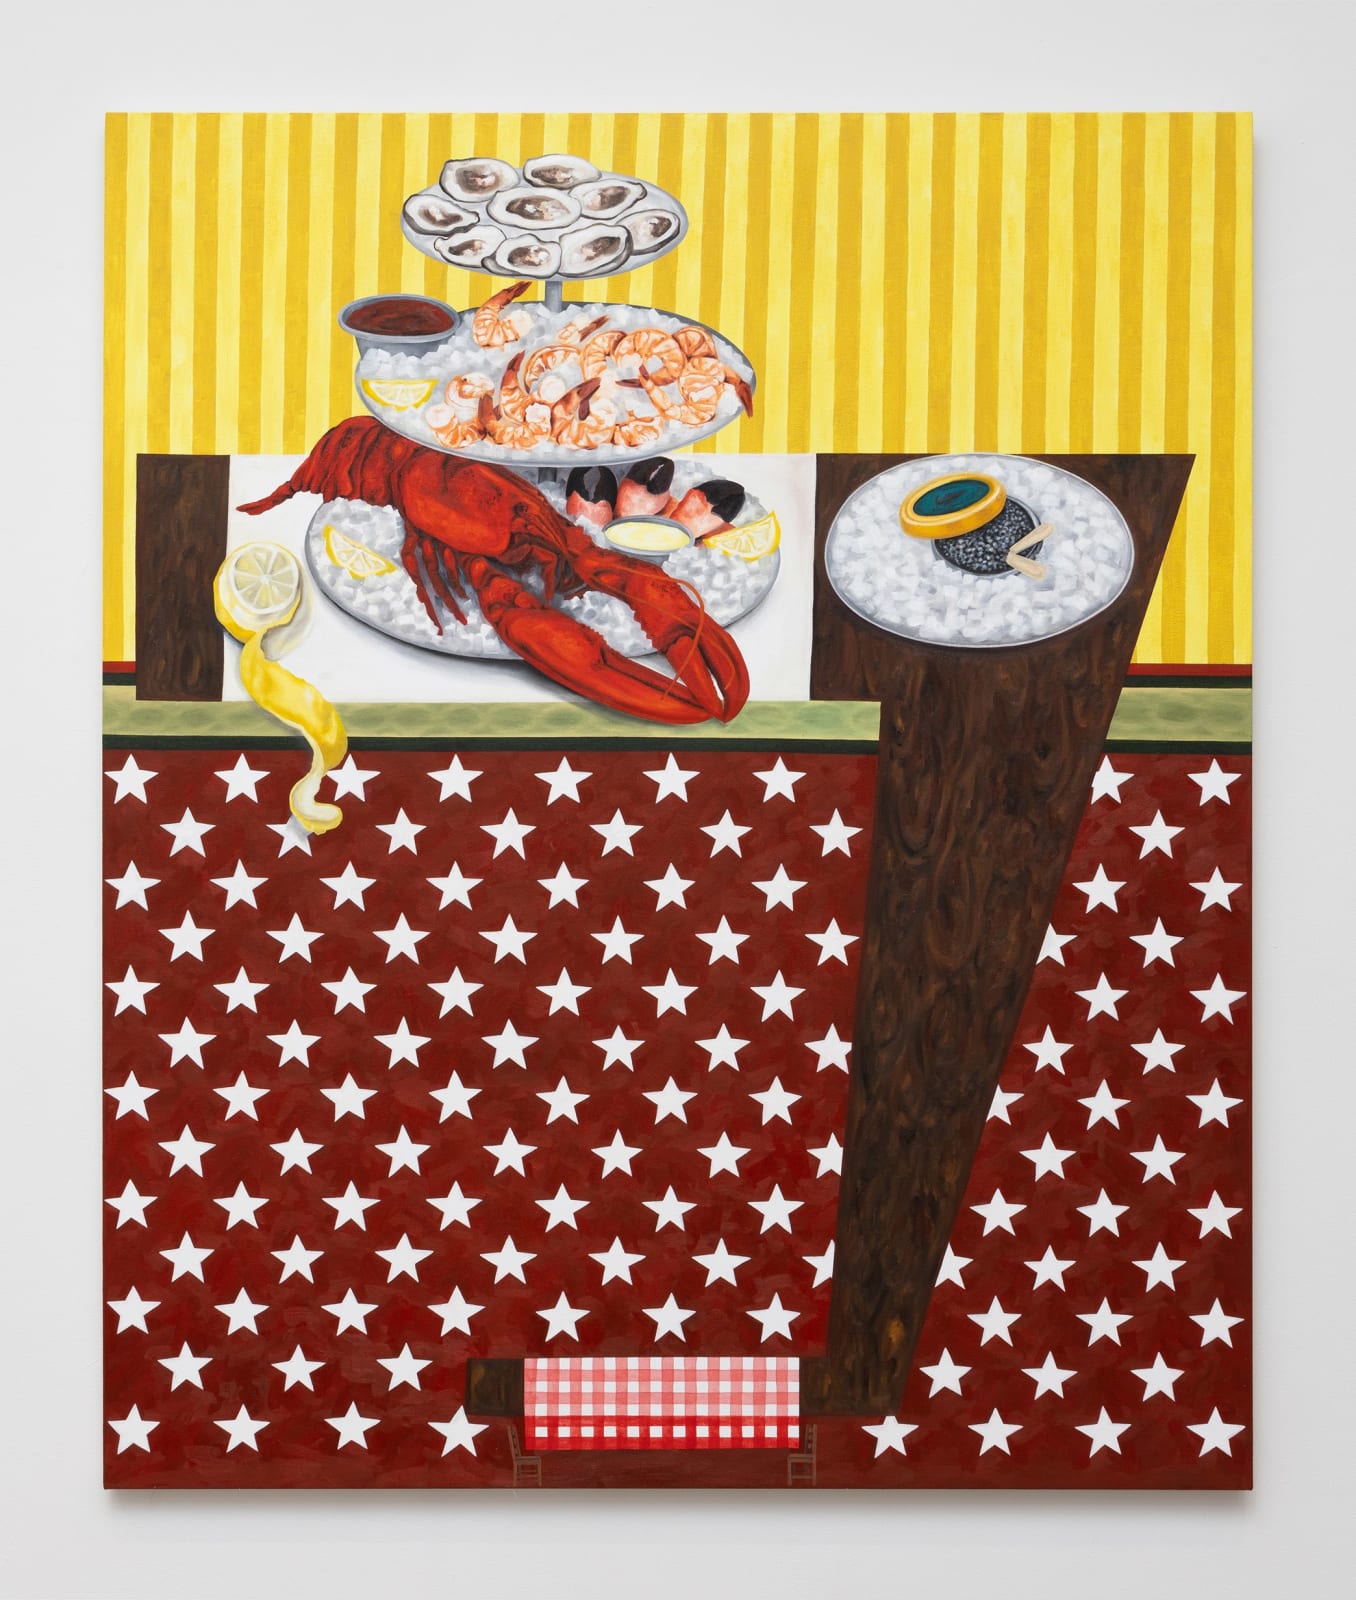 Painting featuring lobster, oyster, shrimp on tiered serving stand with lemon and caviar on a wooden table, in front of yellow striped and white stars on red background.